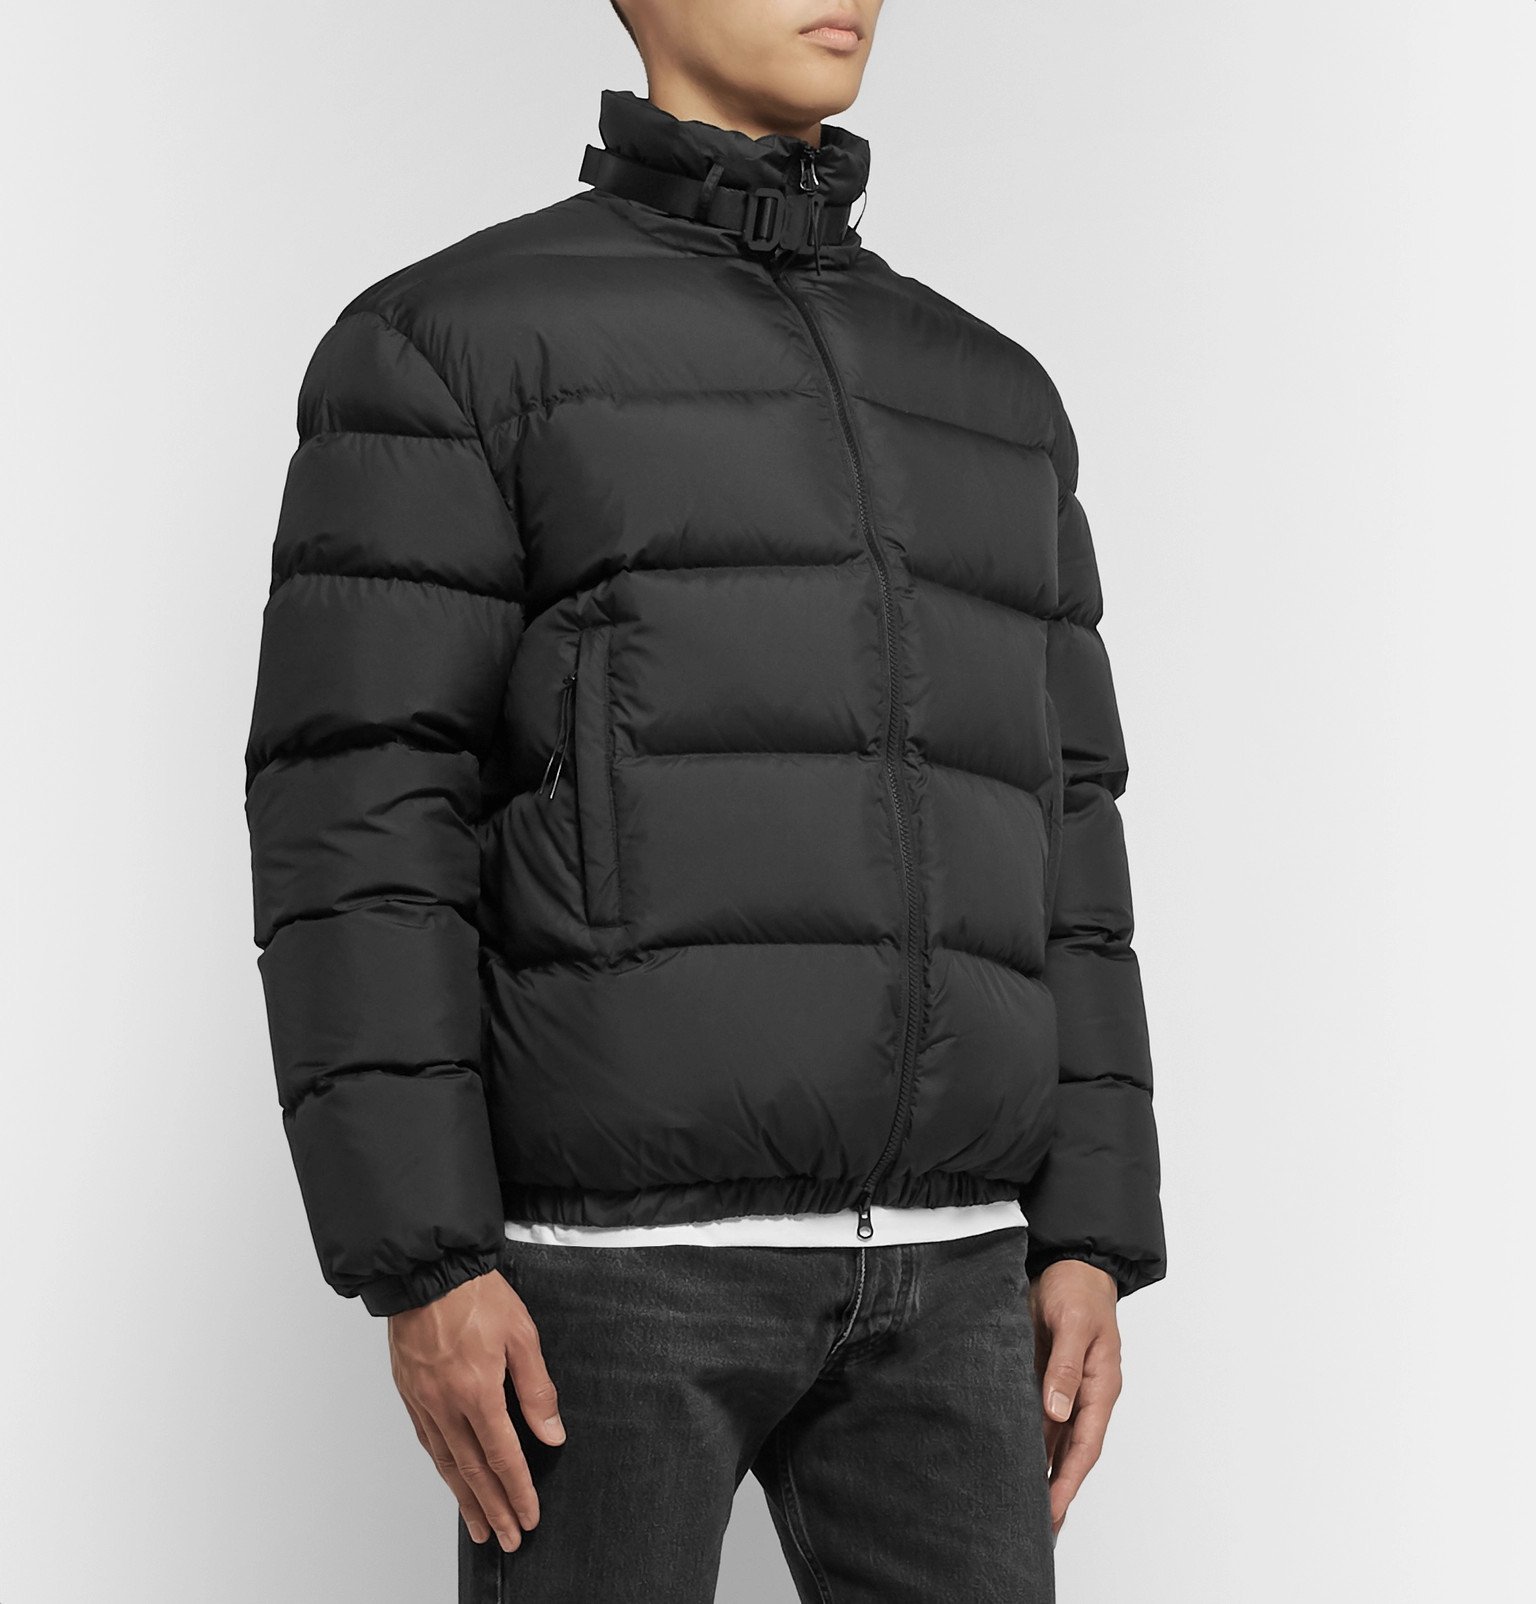 1017 ALYX 9SM - Quilted Nylon-Ripstop Down Jacket - Black 1017 ALYX 9SM